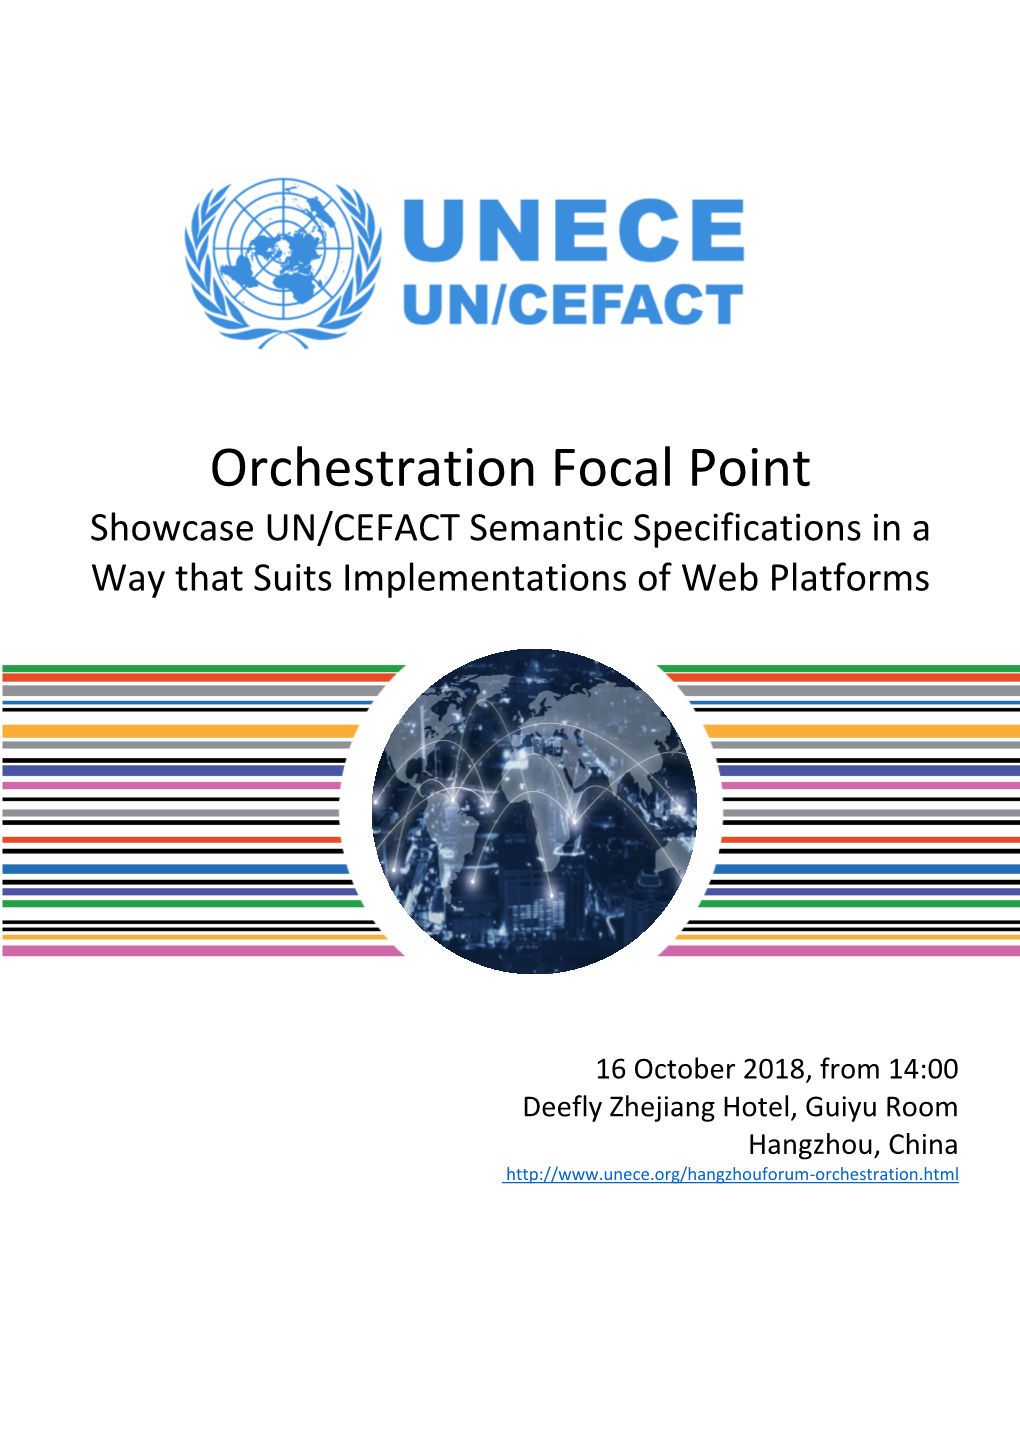 Orchestration Focal Point Showcase UN/CEFACT Semantic Specifications in a Way That Suits Implementations of Web Platforms